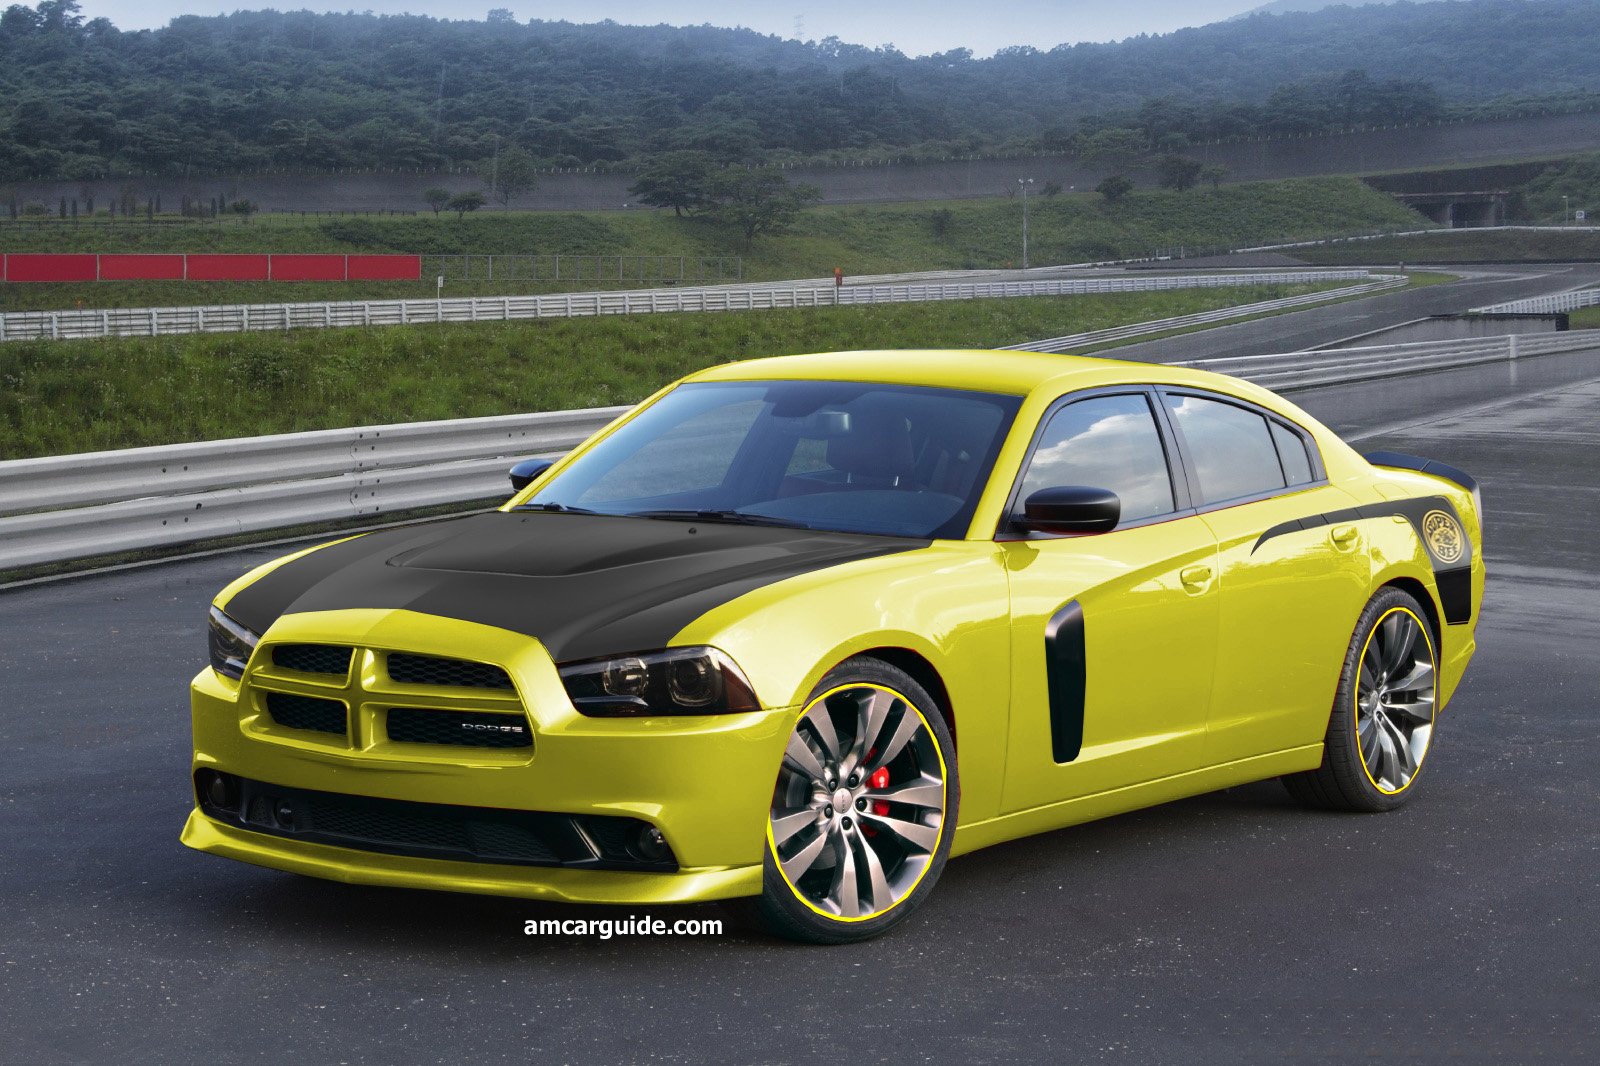 Dodge Charger Super Bee wallpapers, Vehicles, HQ Dodge Charger Super